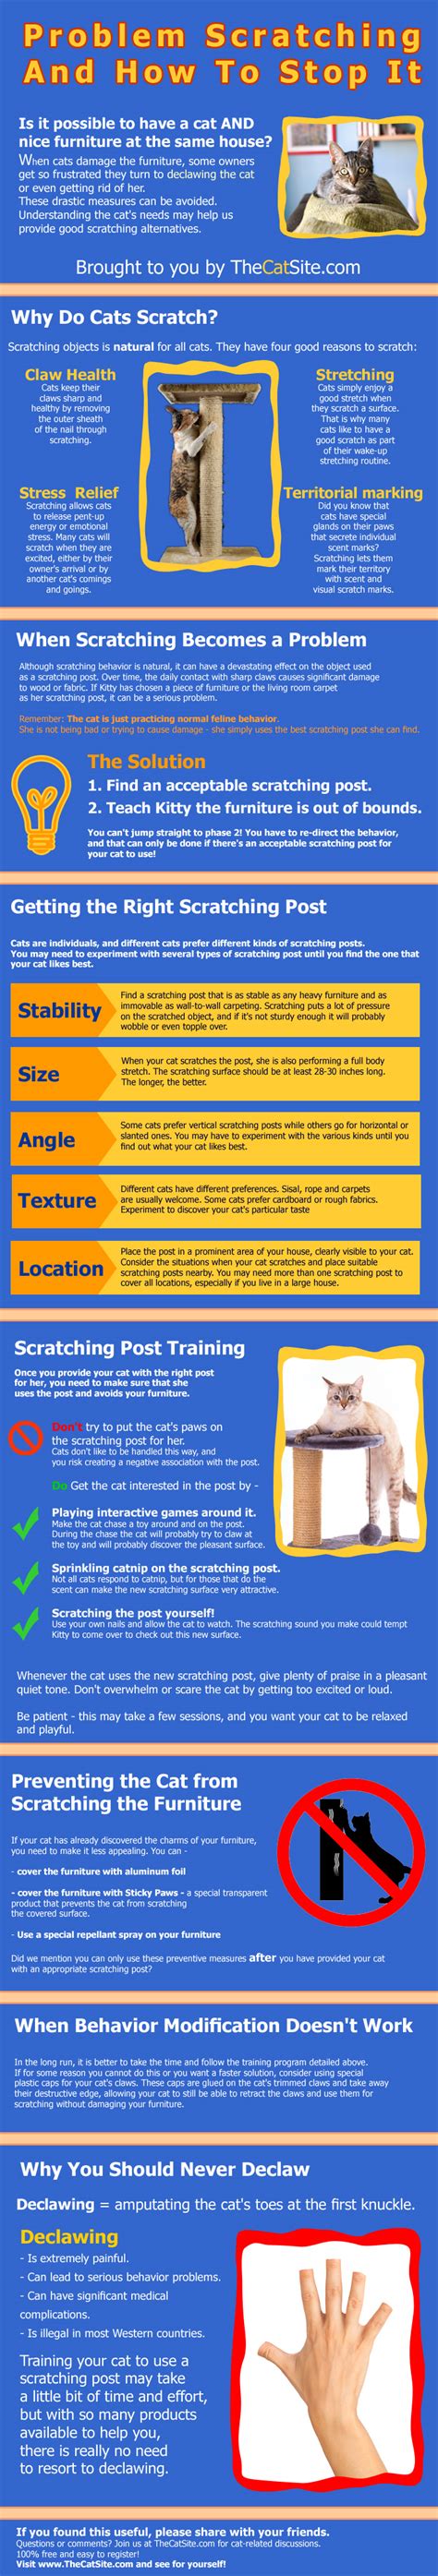 Pros and Cons of Declawing Cats - HRF